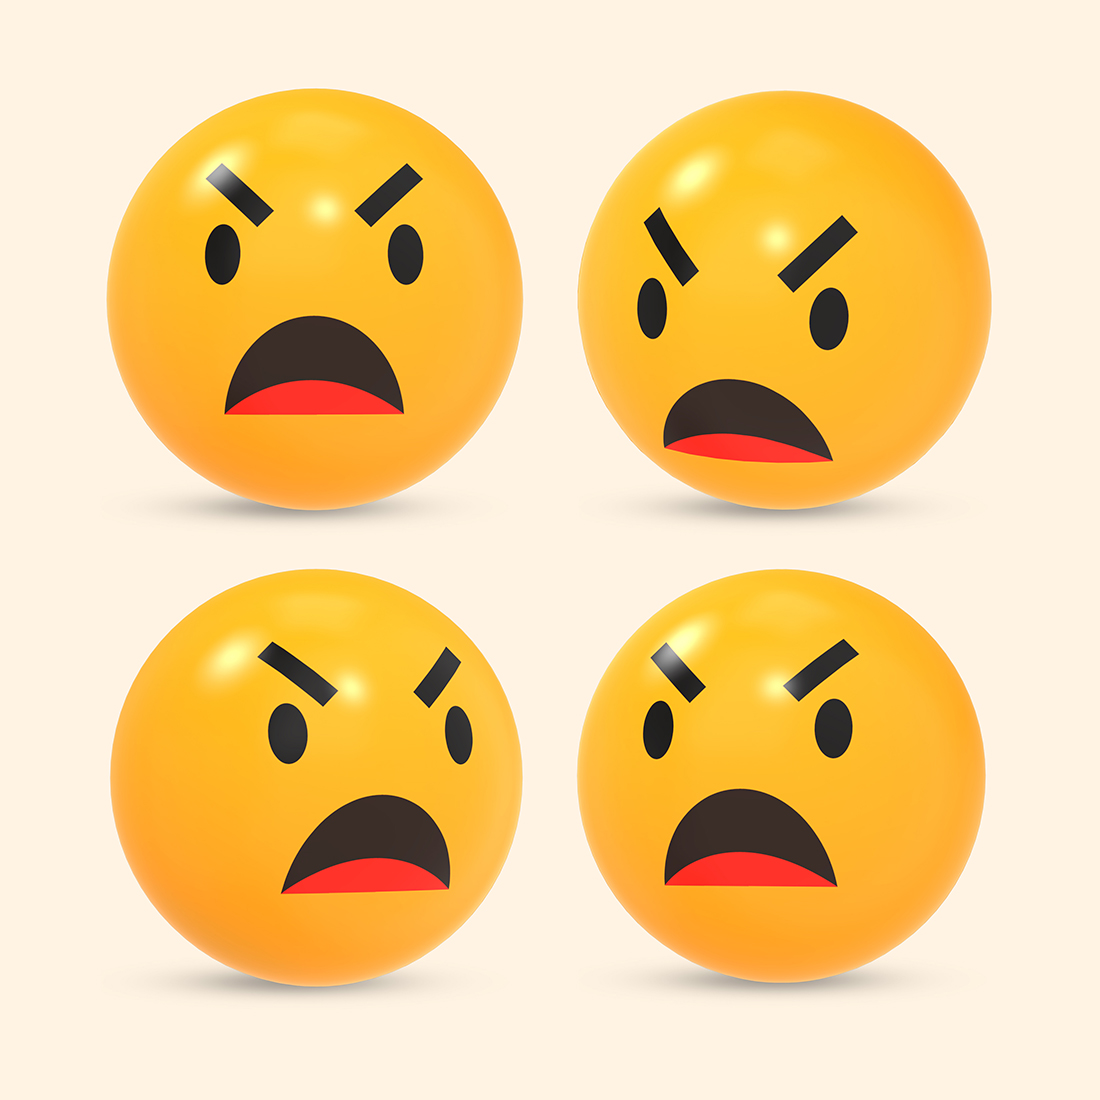 3D rendered social media icon of angry emoji reaction with different view preview image.